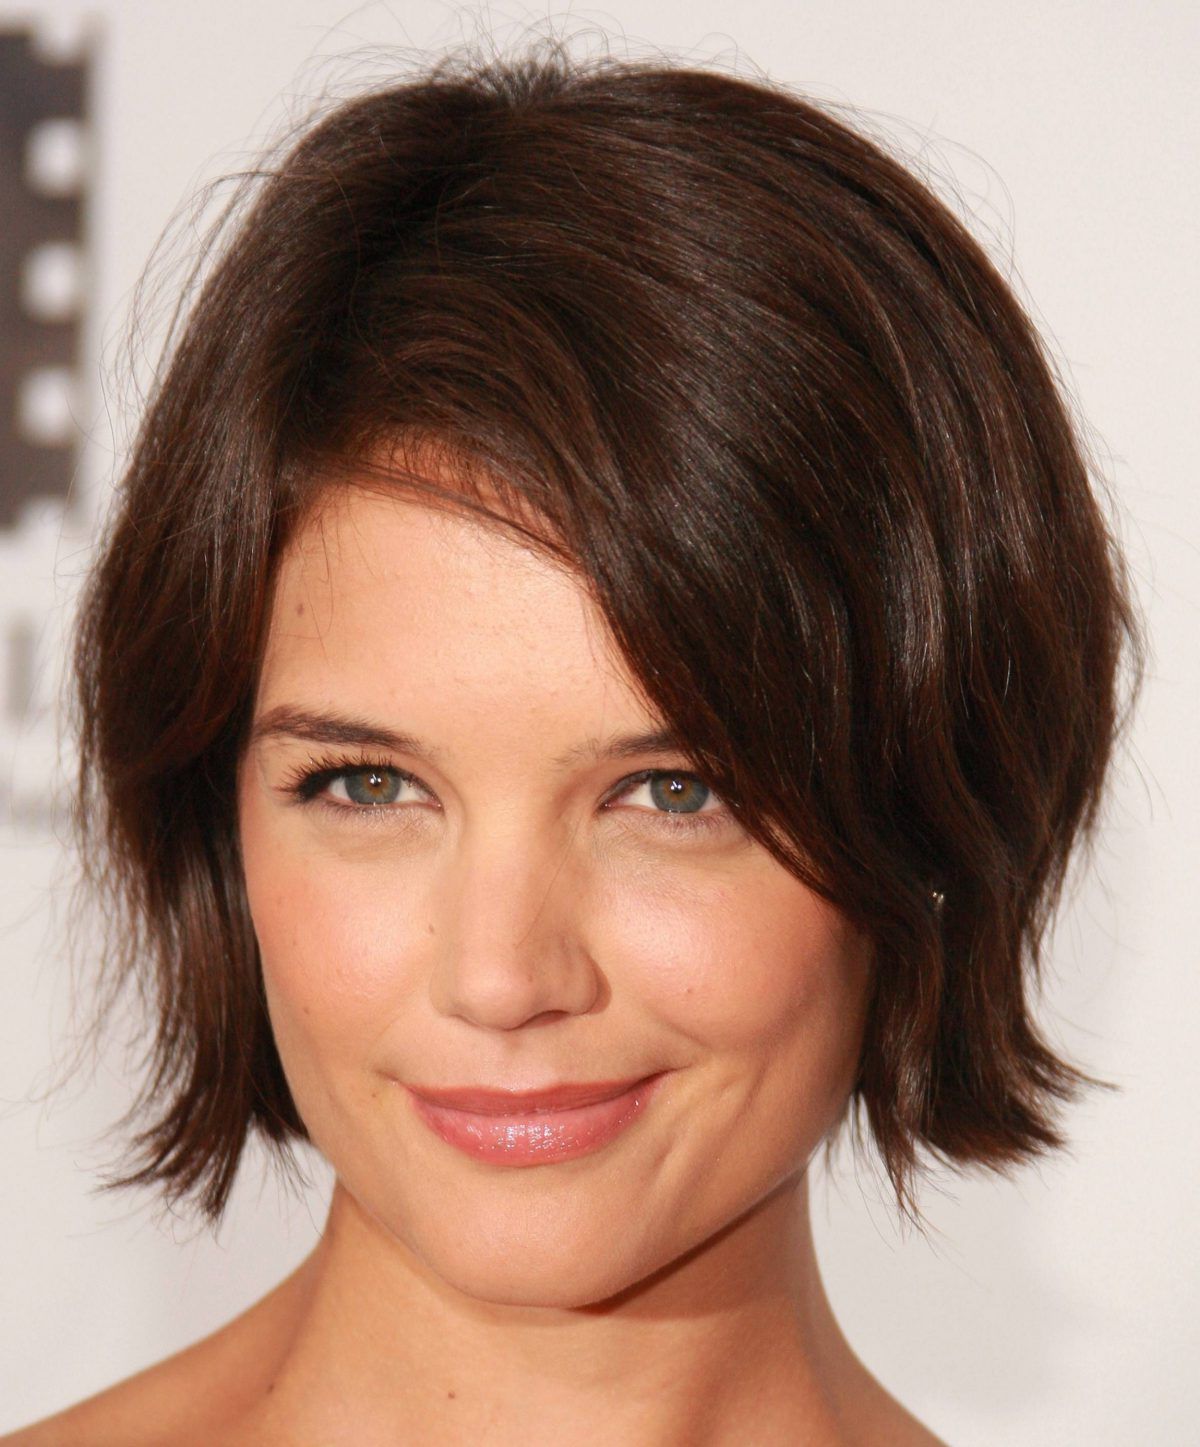 Best Short Hairstyles – Cute Hair Cut Guide For Round Face Shape With Short Haircuts For Round Faces (View 11 of 25)